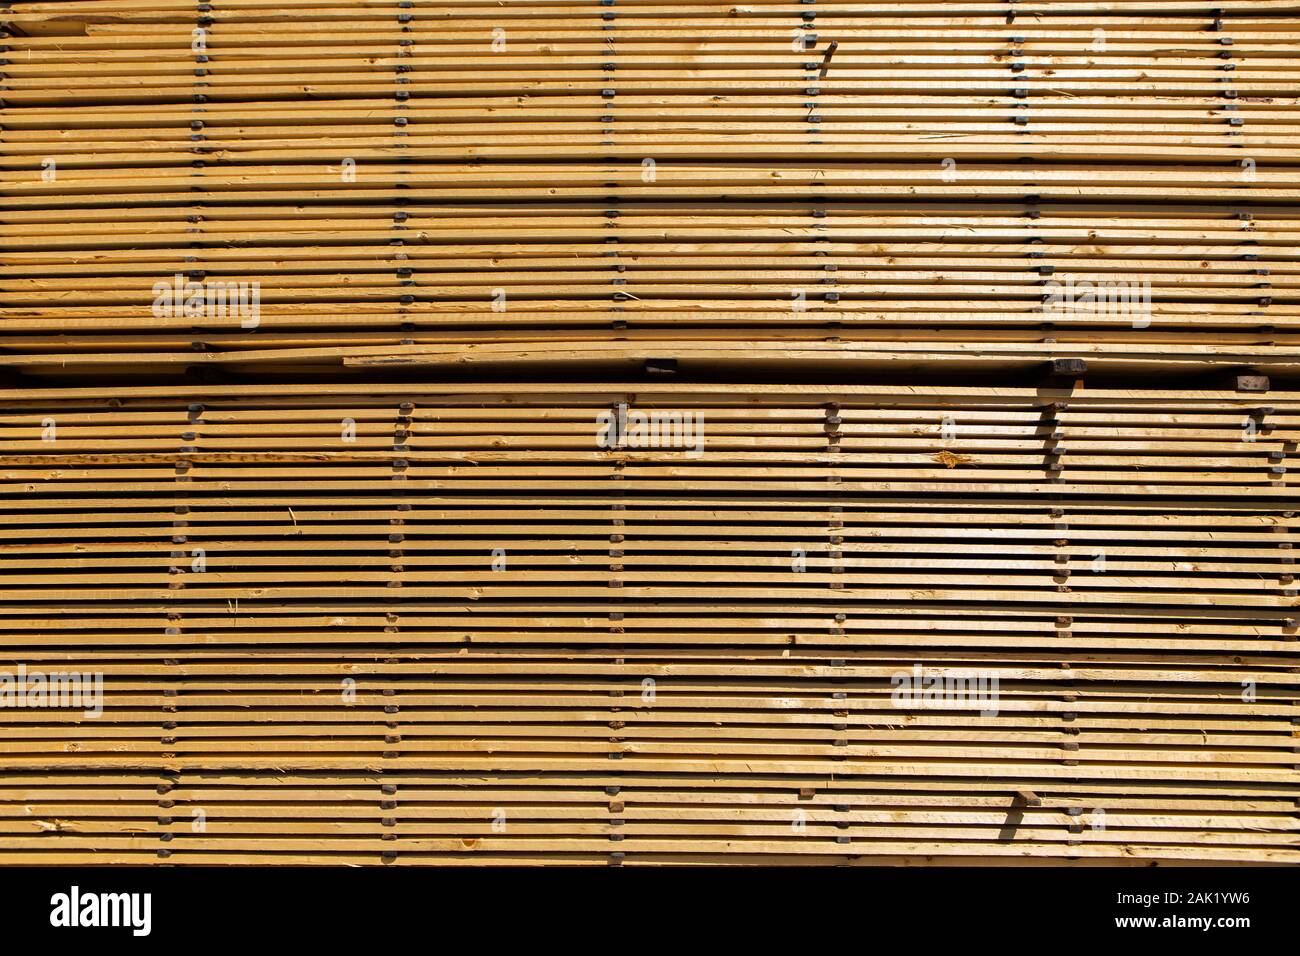 A textured background filling the frame with long and thin wooden planks. Pine boards treated and stored outside a sawmill. Ready for transport. Stock Photo